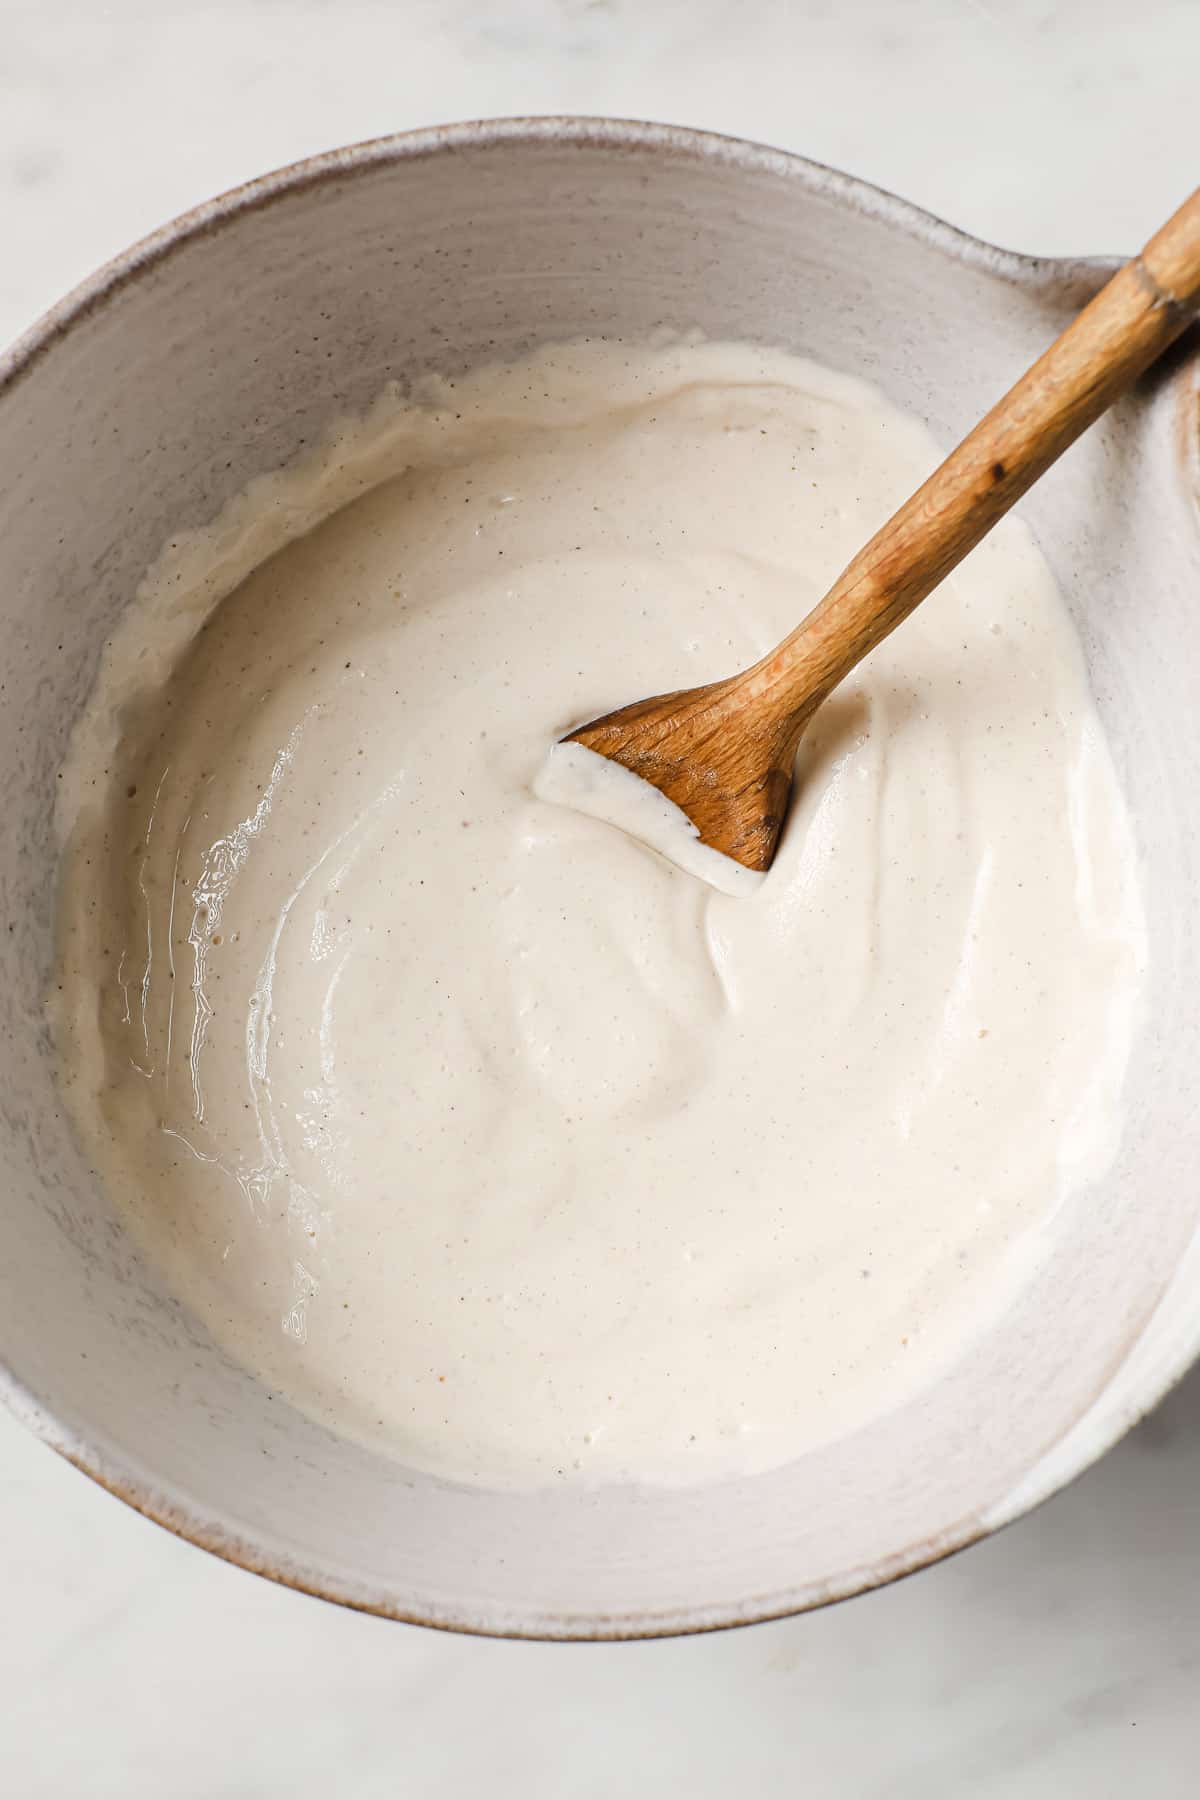 A mixing bowl full of cheesecake batter, with a wooden spoon.